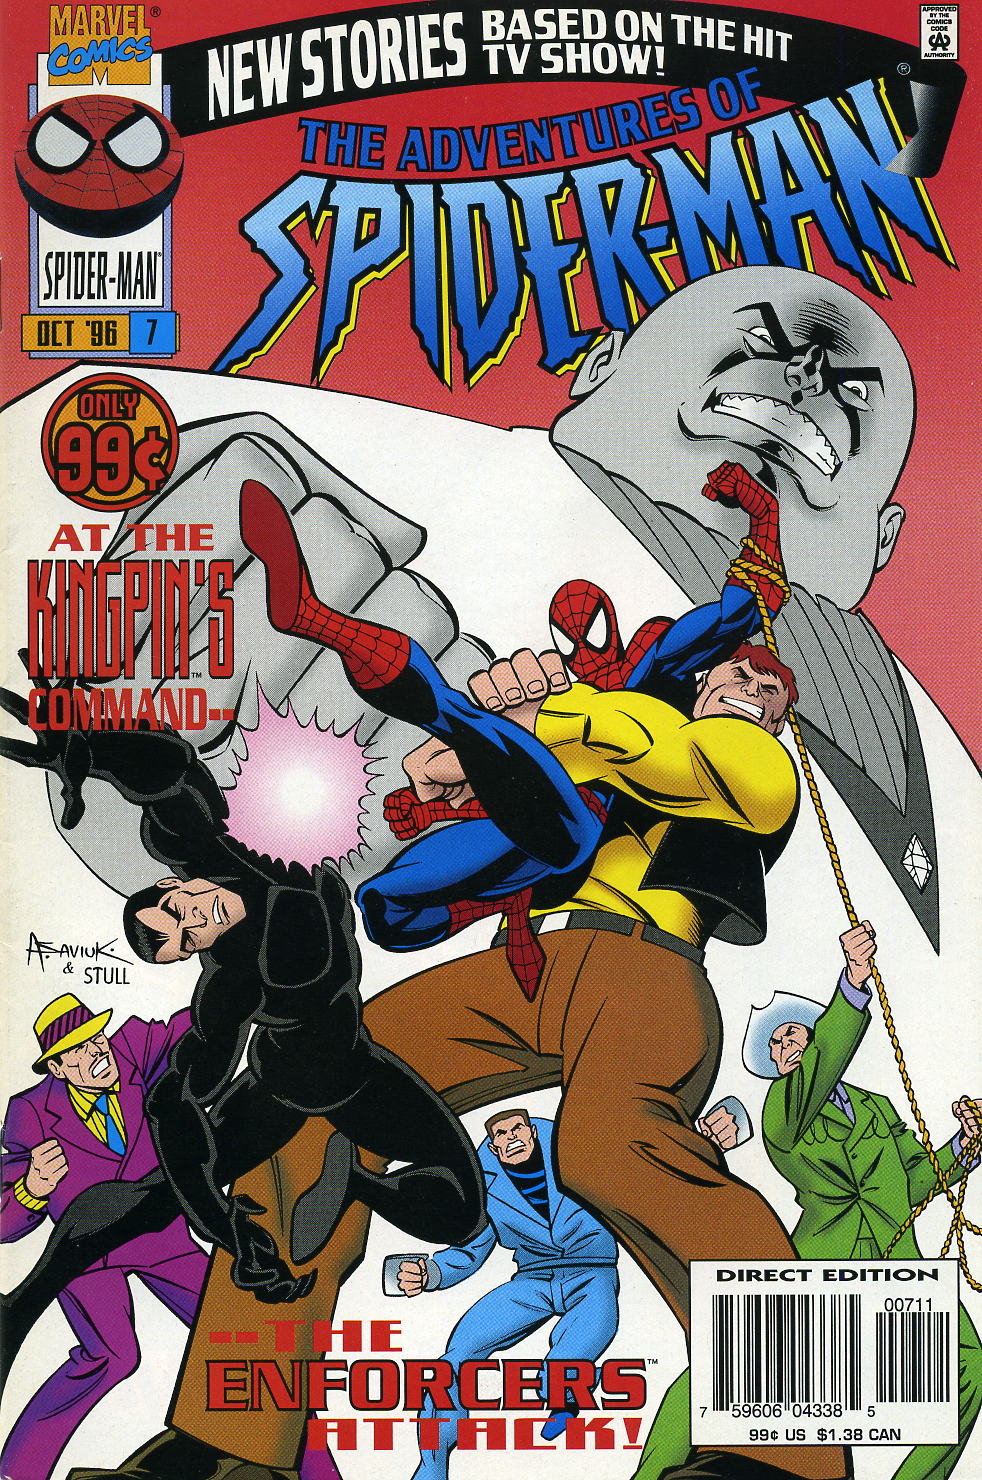 Read online The Adventures of Spider-Man comic -  Issue #7 - 1